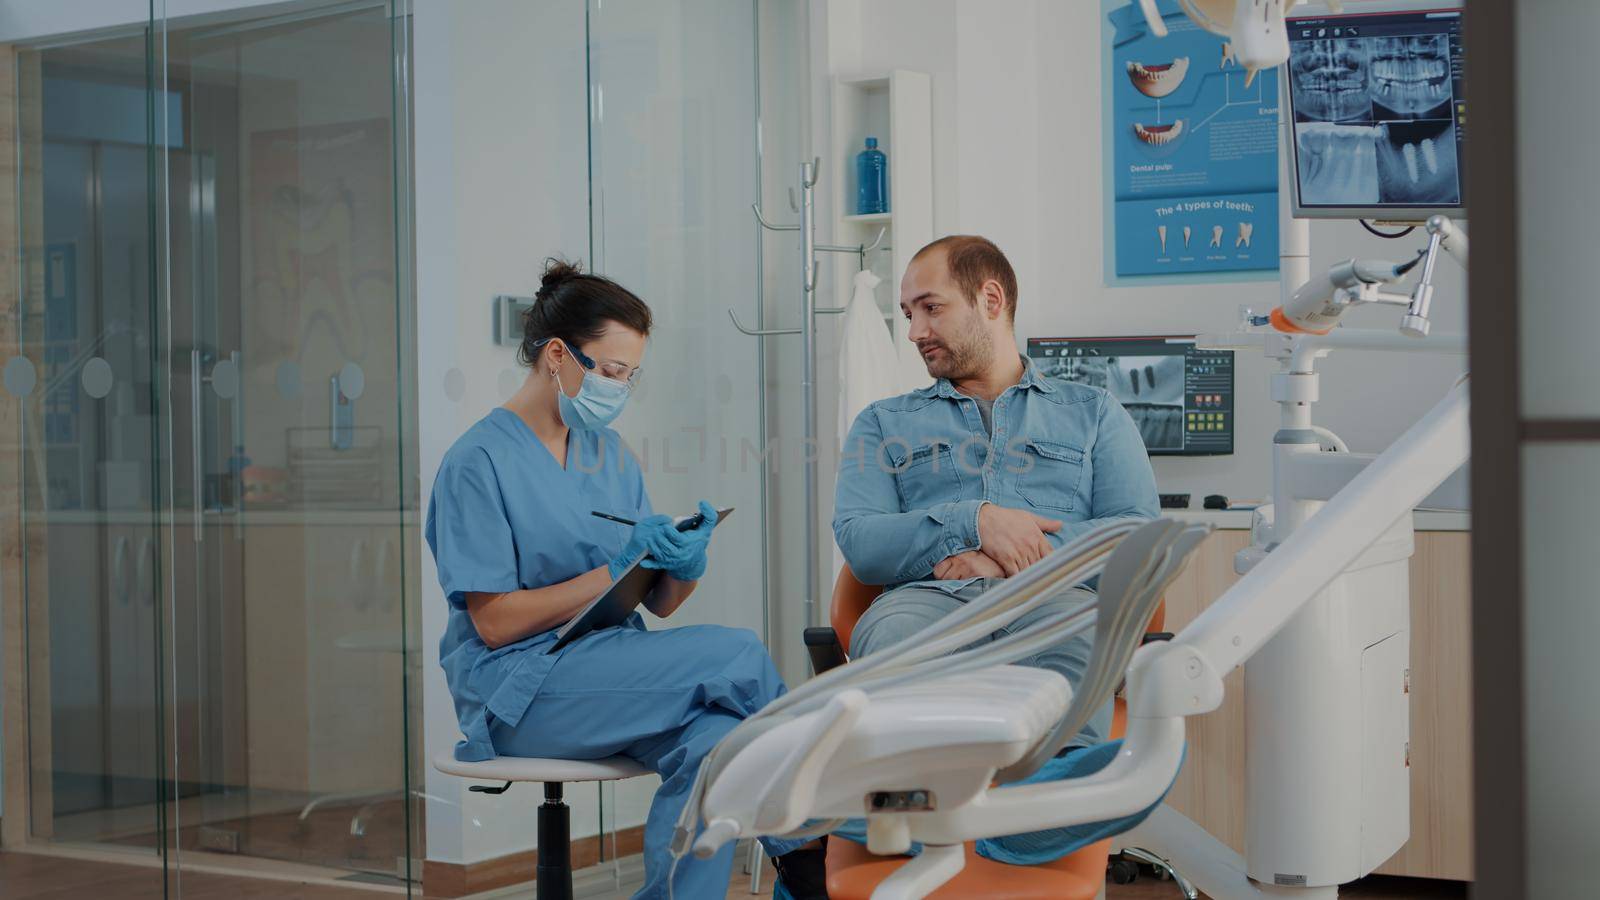 Dental nurse taking notes and consulting patient with toothache, preparing to do oral care examination with dentistry tools. Man attending dental checkup appointment with stomatologist